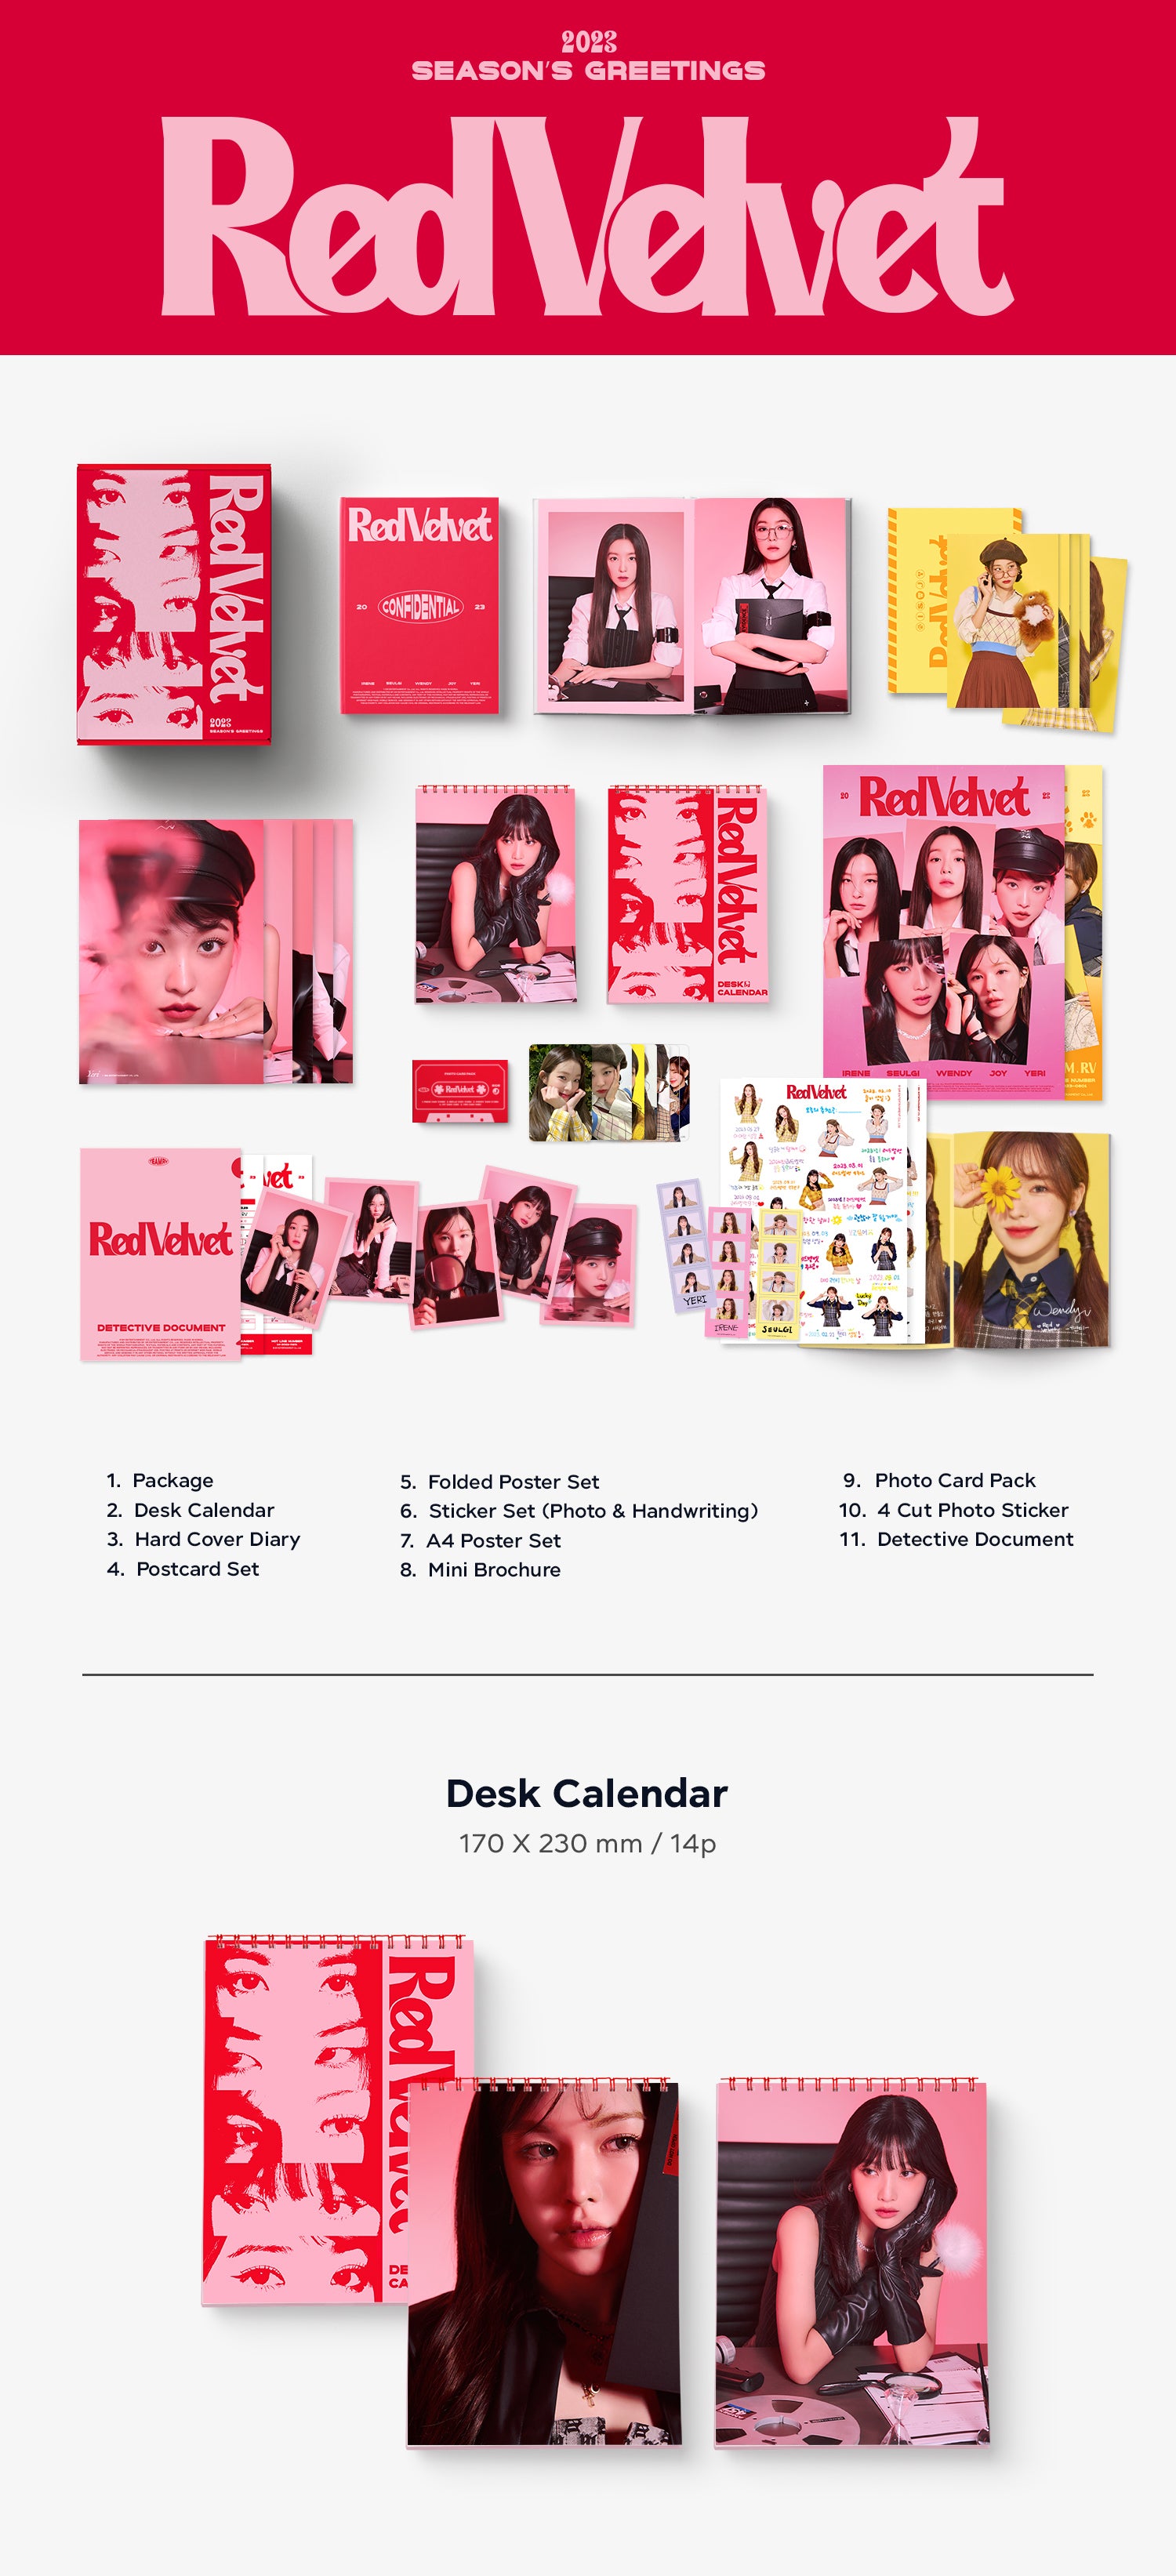 UK Free shipping for Red Velvet 2023 Season's Greetings with pre-order benefit POB special photocard set. Buy from a huge collection of official merch at the best online kpop store marketplace in Manchester UK Europe. Our shop stocks K-pop LOONA BTS TXT. We have Kuromi Sanrio photocard holder keyrings for sale.